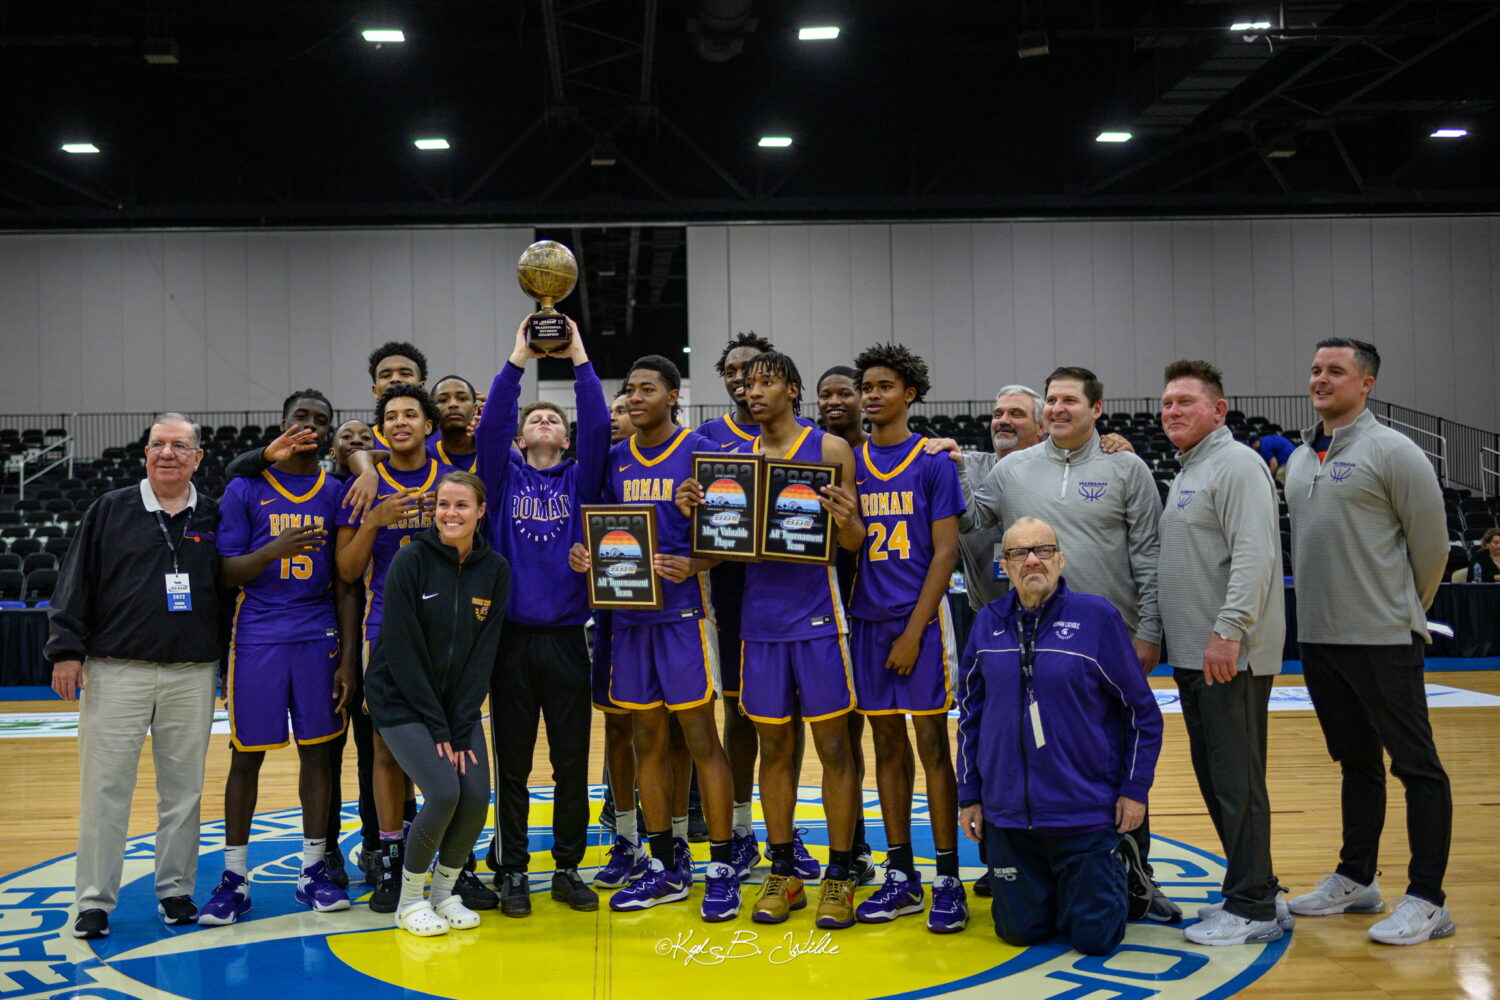 2022 BBC Traditional Champs - Roman Catholic (PA) Defeated Dorman (SC) in Overtime 56-54